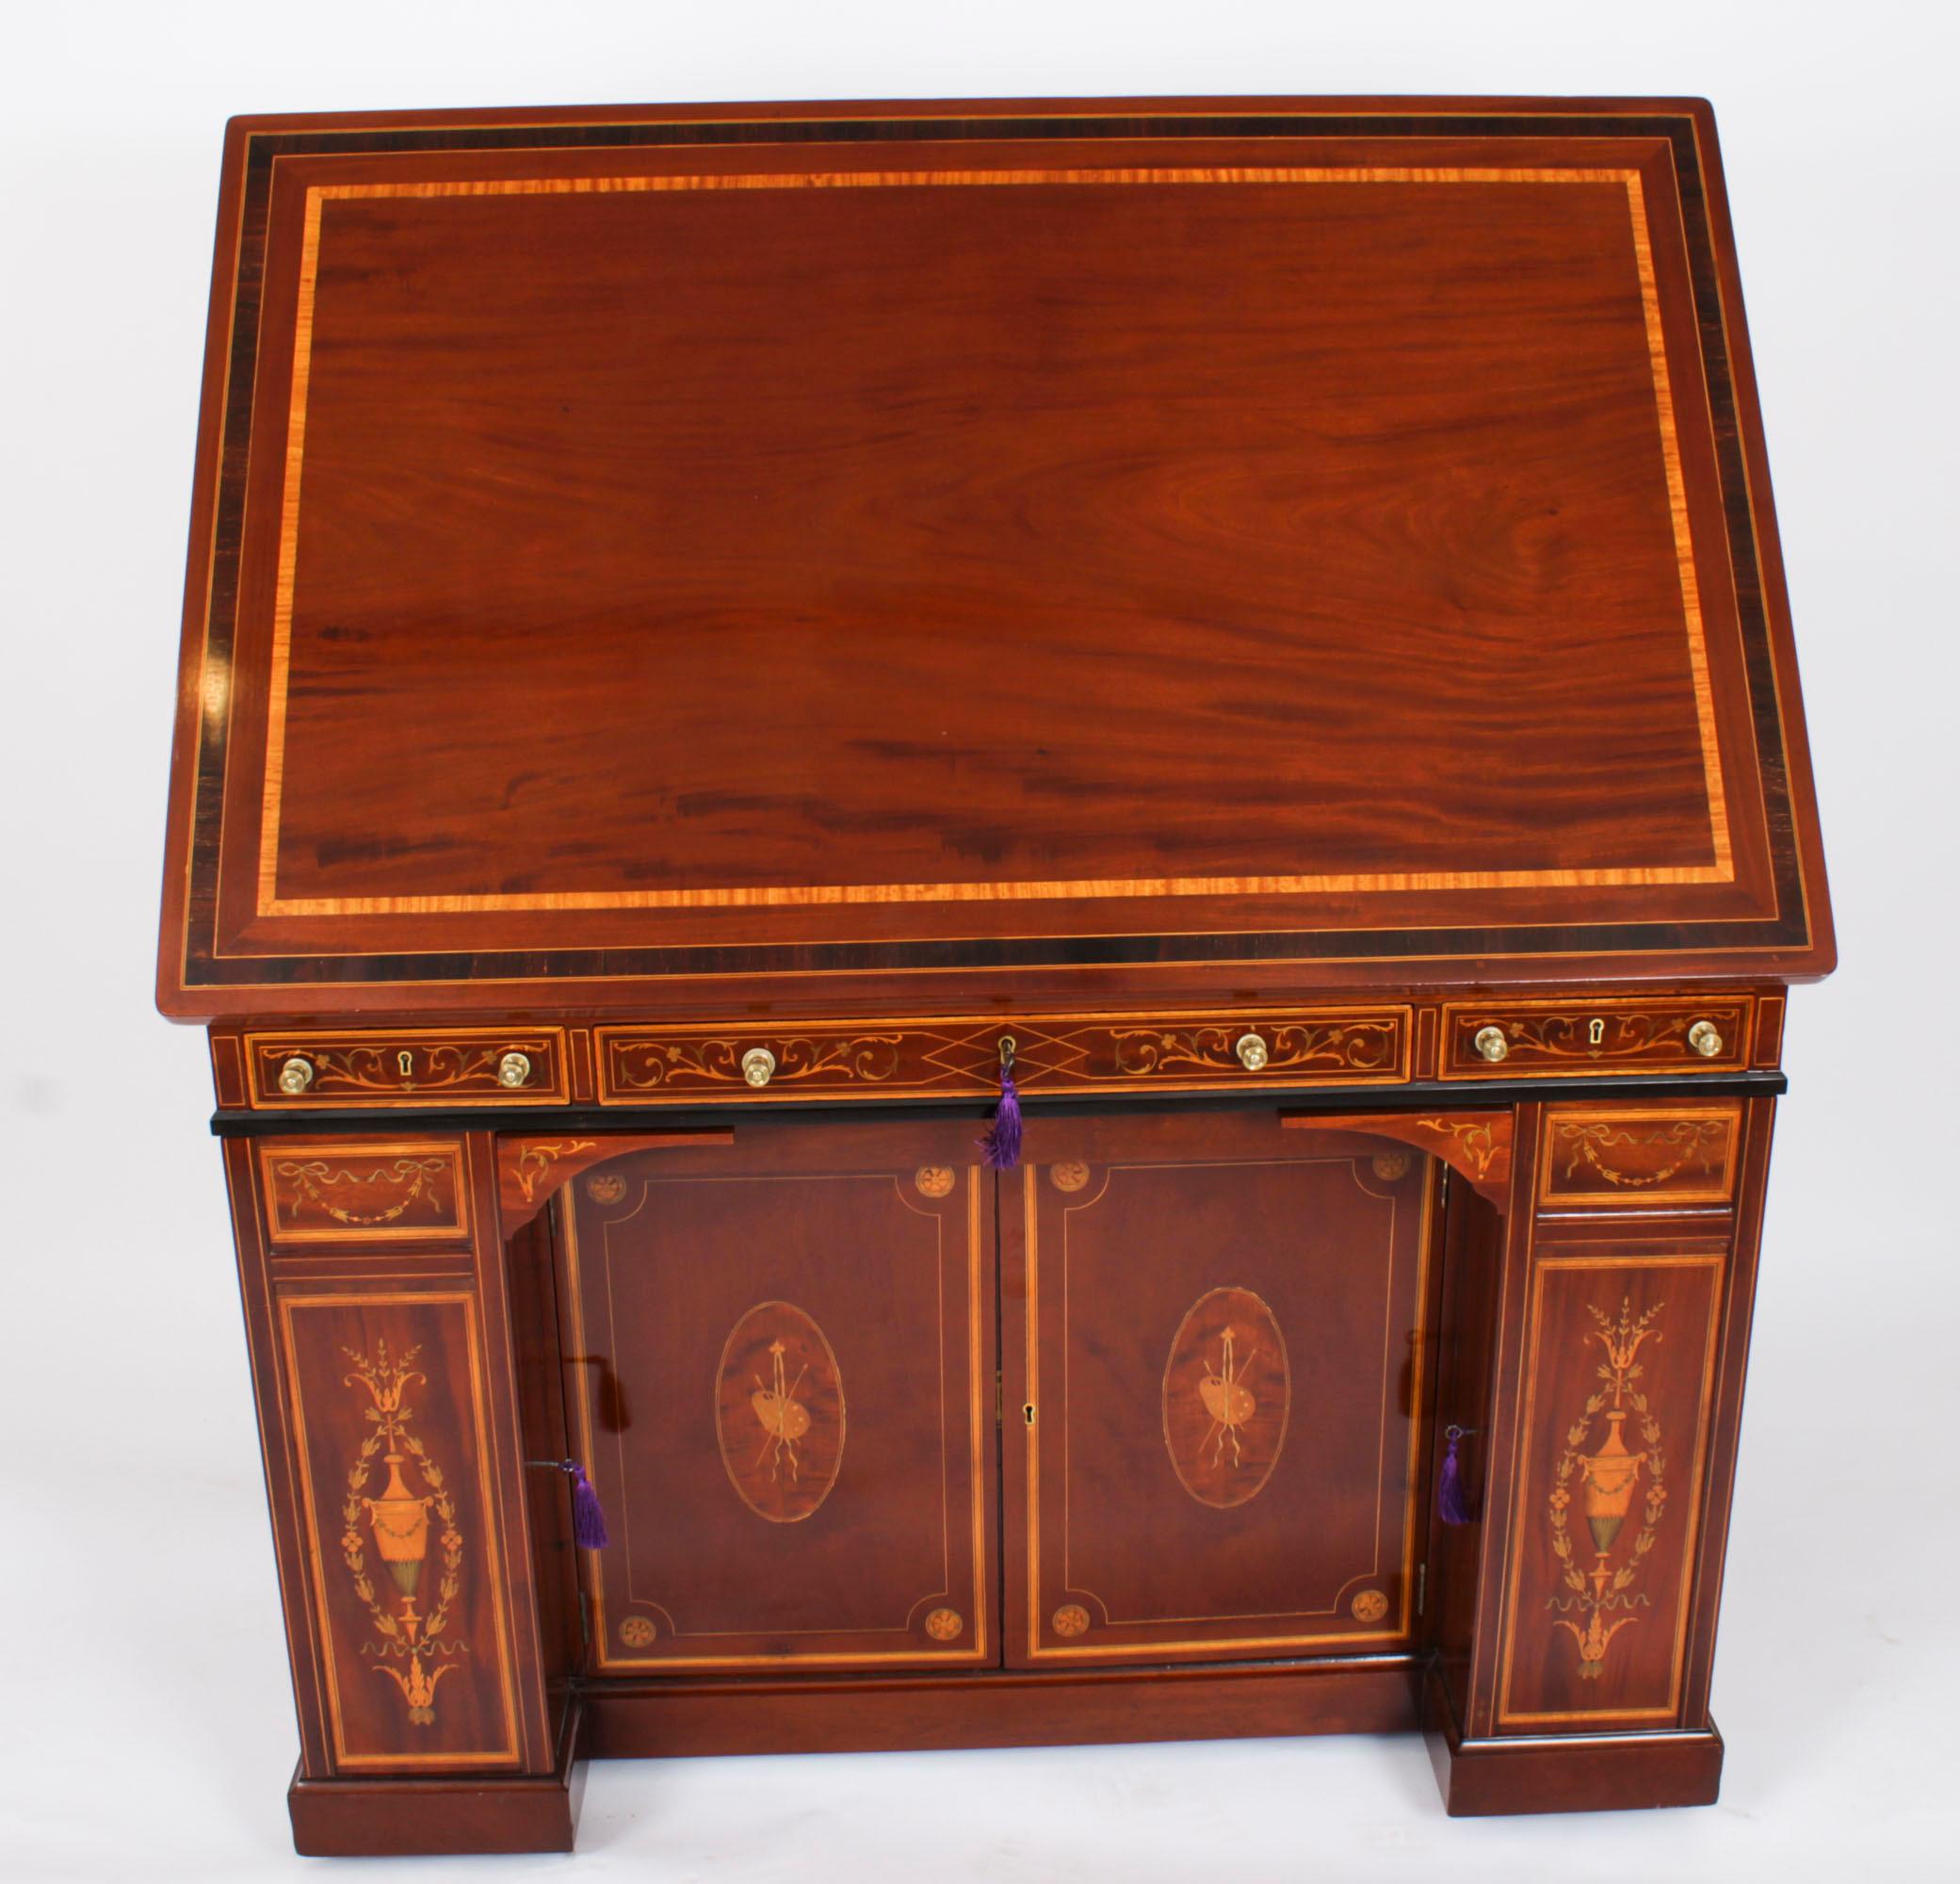 High Victorian Antique Victorian Inlaid Mahogany Architects Desk by Edwards & Roberts For Sale